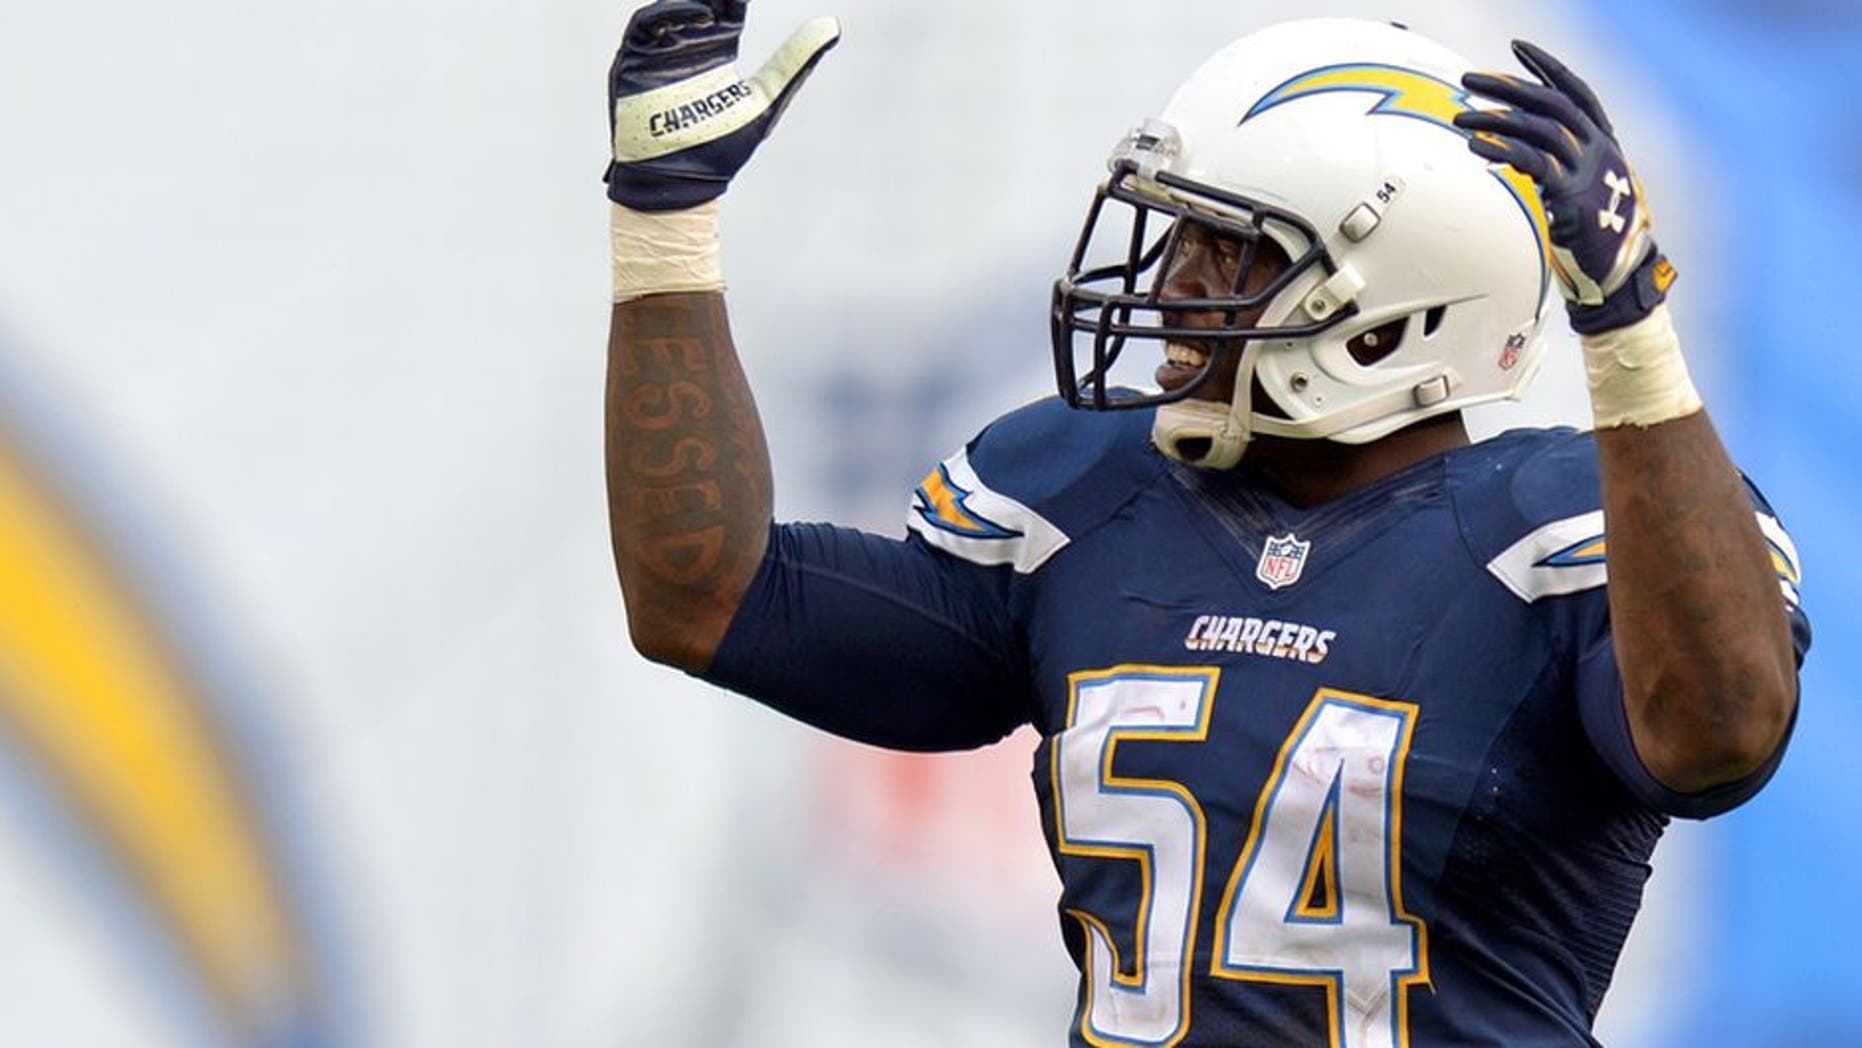 Chargers sign Ingram to 4-year deal | Fox News